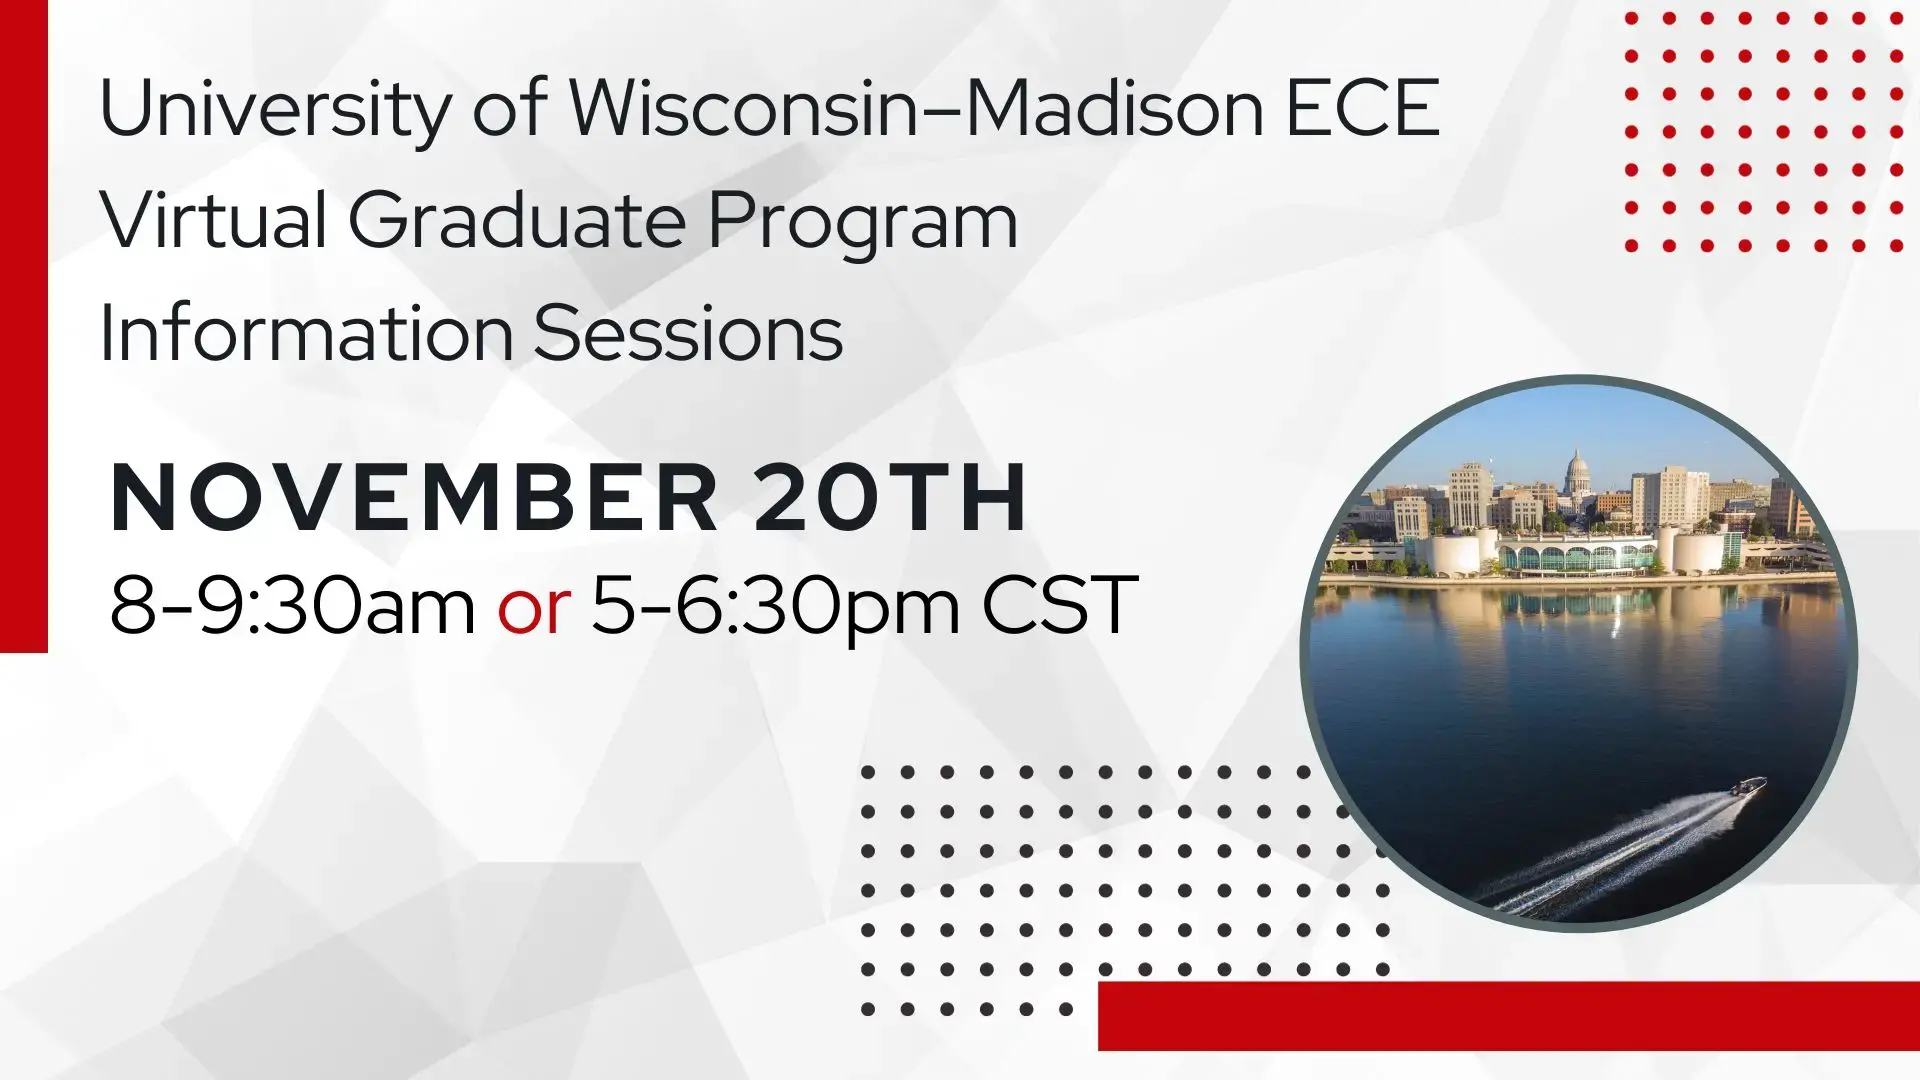 University of Wisconsin Madison ECE Virtual Graduate Program Information Sessions, November 20th 8-9:30AM or 5-6:30pm CST. Photo of boat crossing Lake Monona in front of Monona Terrace with capital skyline in background